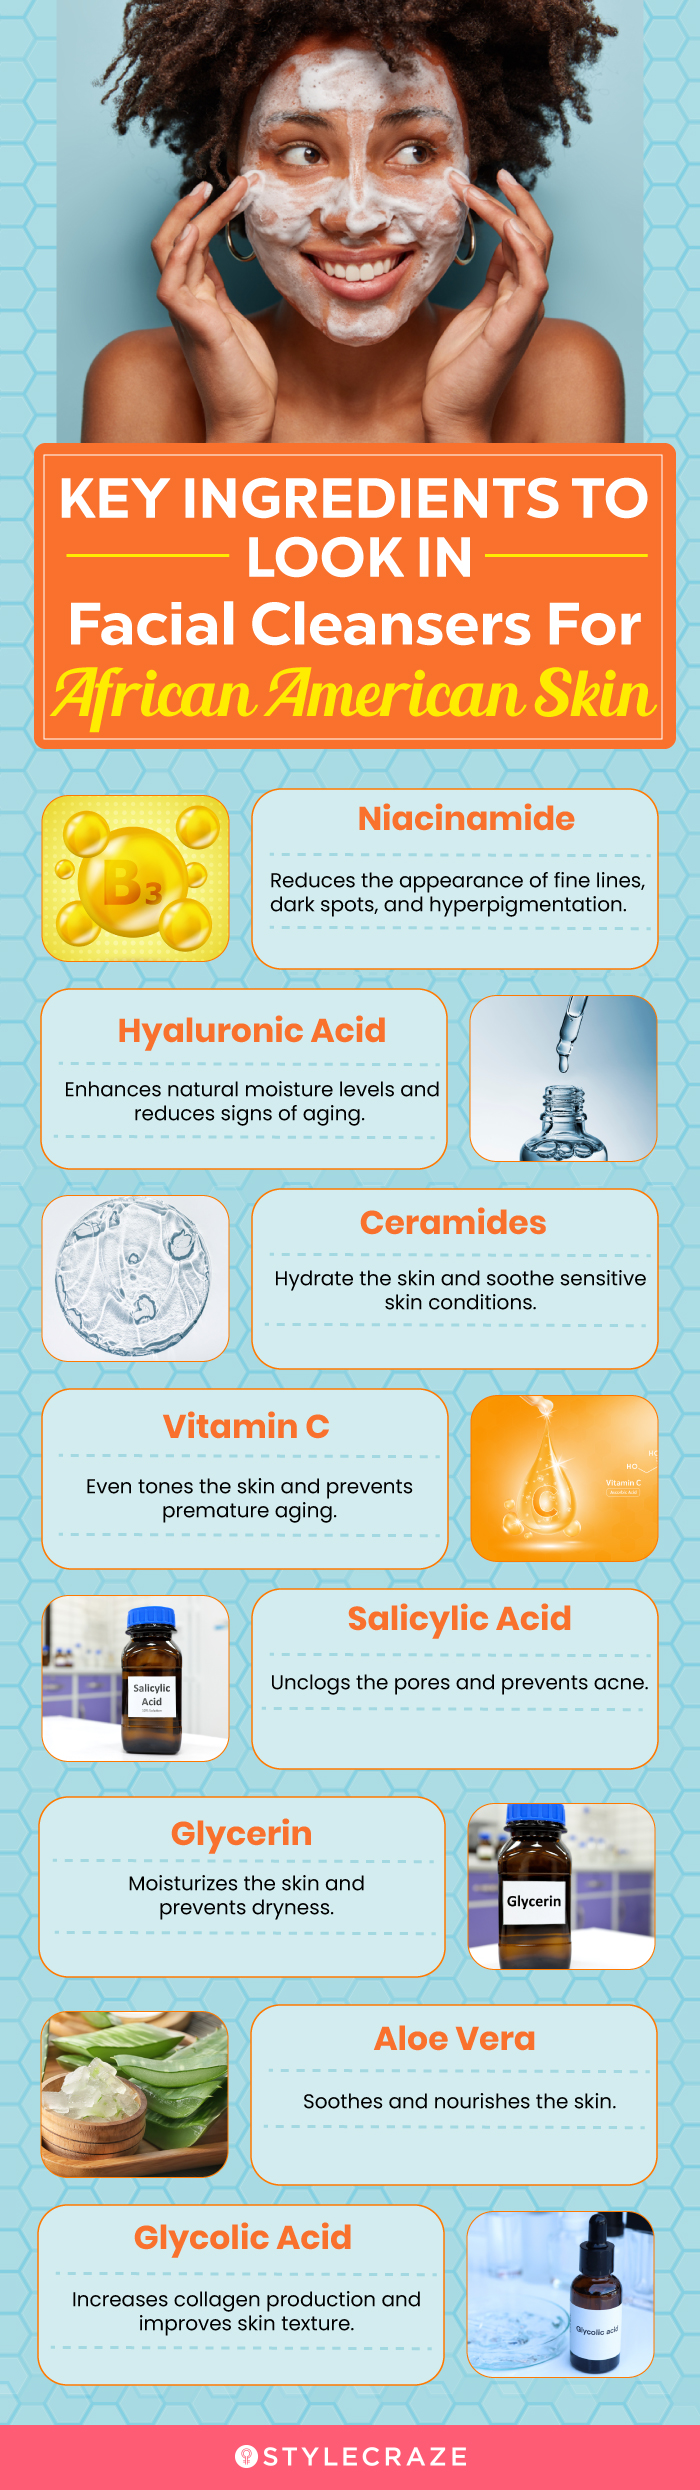 Key Ingredients To Look In Facial Cleansers For African American Skin[infographic]